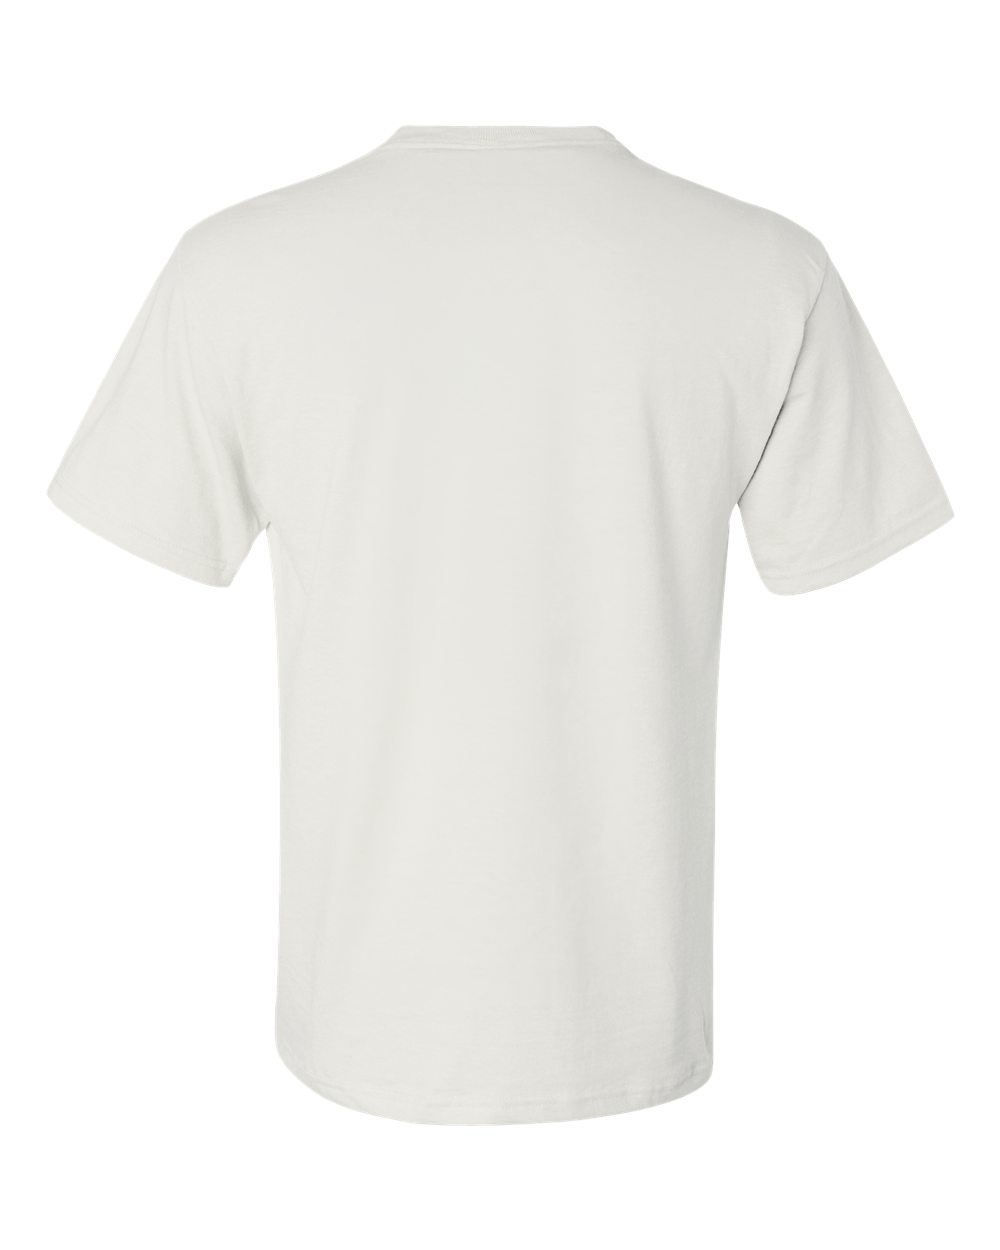 Jerzees 29MPR Dri-Power Active 50/50 T-Shirt with a Pocket